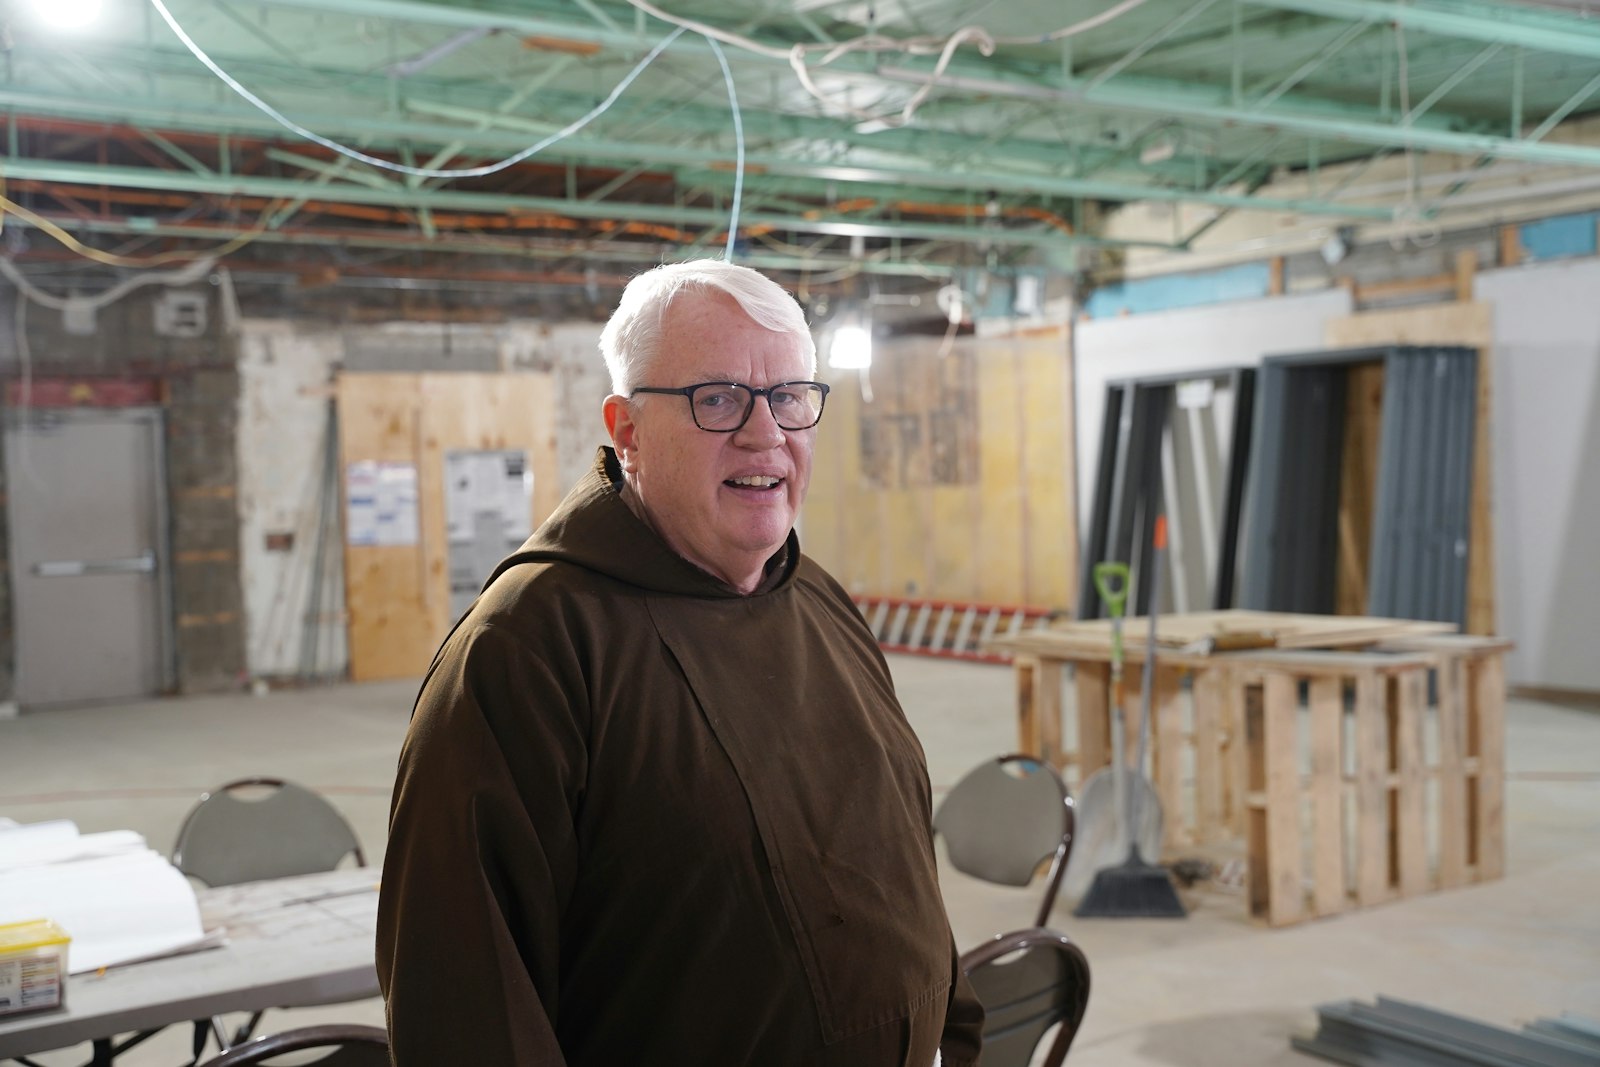 Bro. Wegner said he thought of renovations to the Capuchin Soup Kitchen on Meldrum Street shortly after taking a tour of the kitchen in March 2021. A big priority for him was installing permanent showers for guests after seeing temporary showers set up in the kitchen's parking lot. (Daniel Meloy | Detroit Catholic)